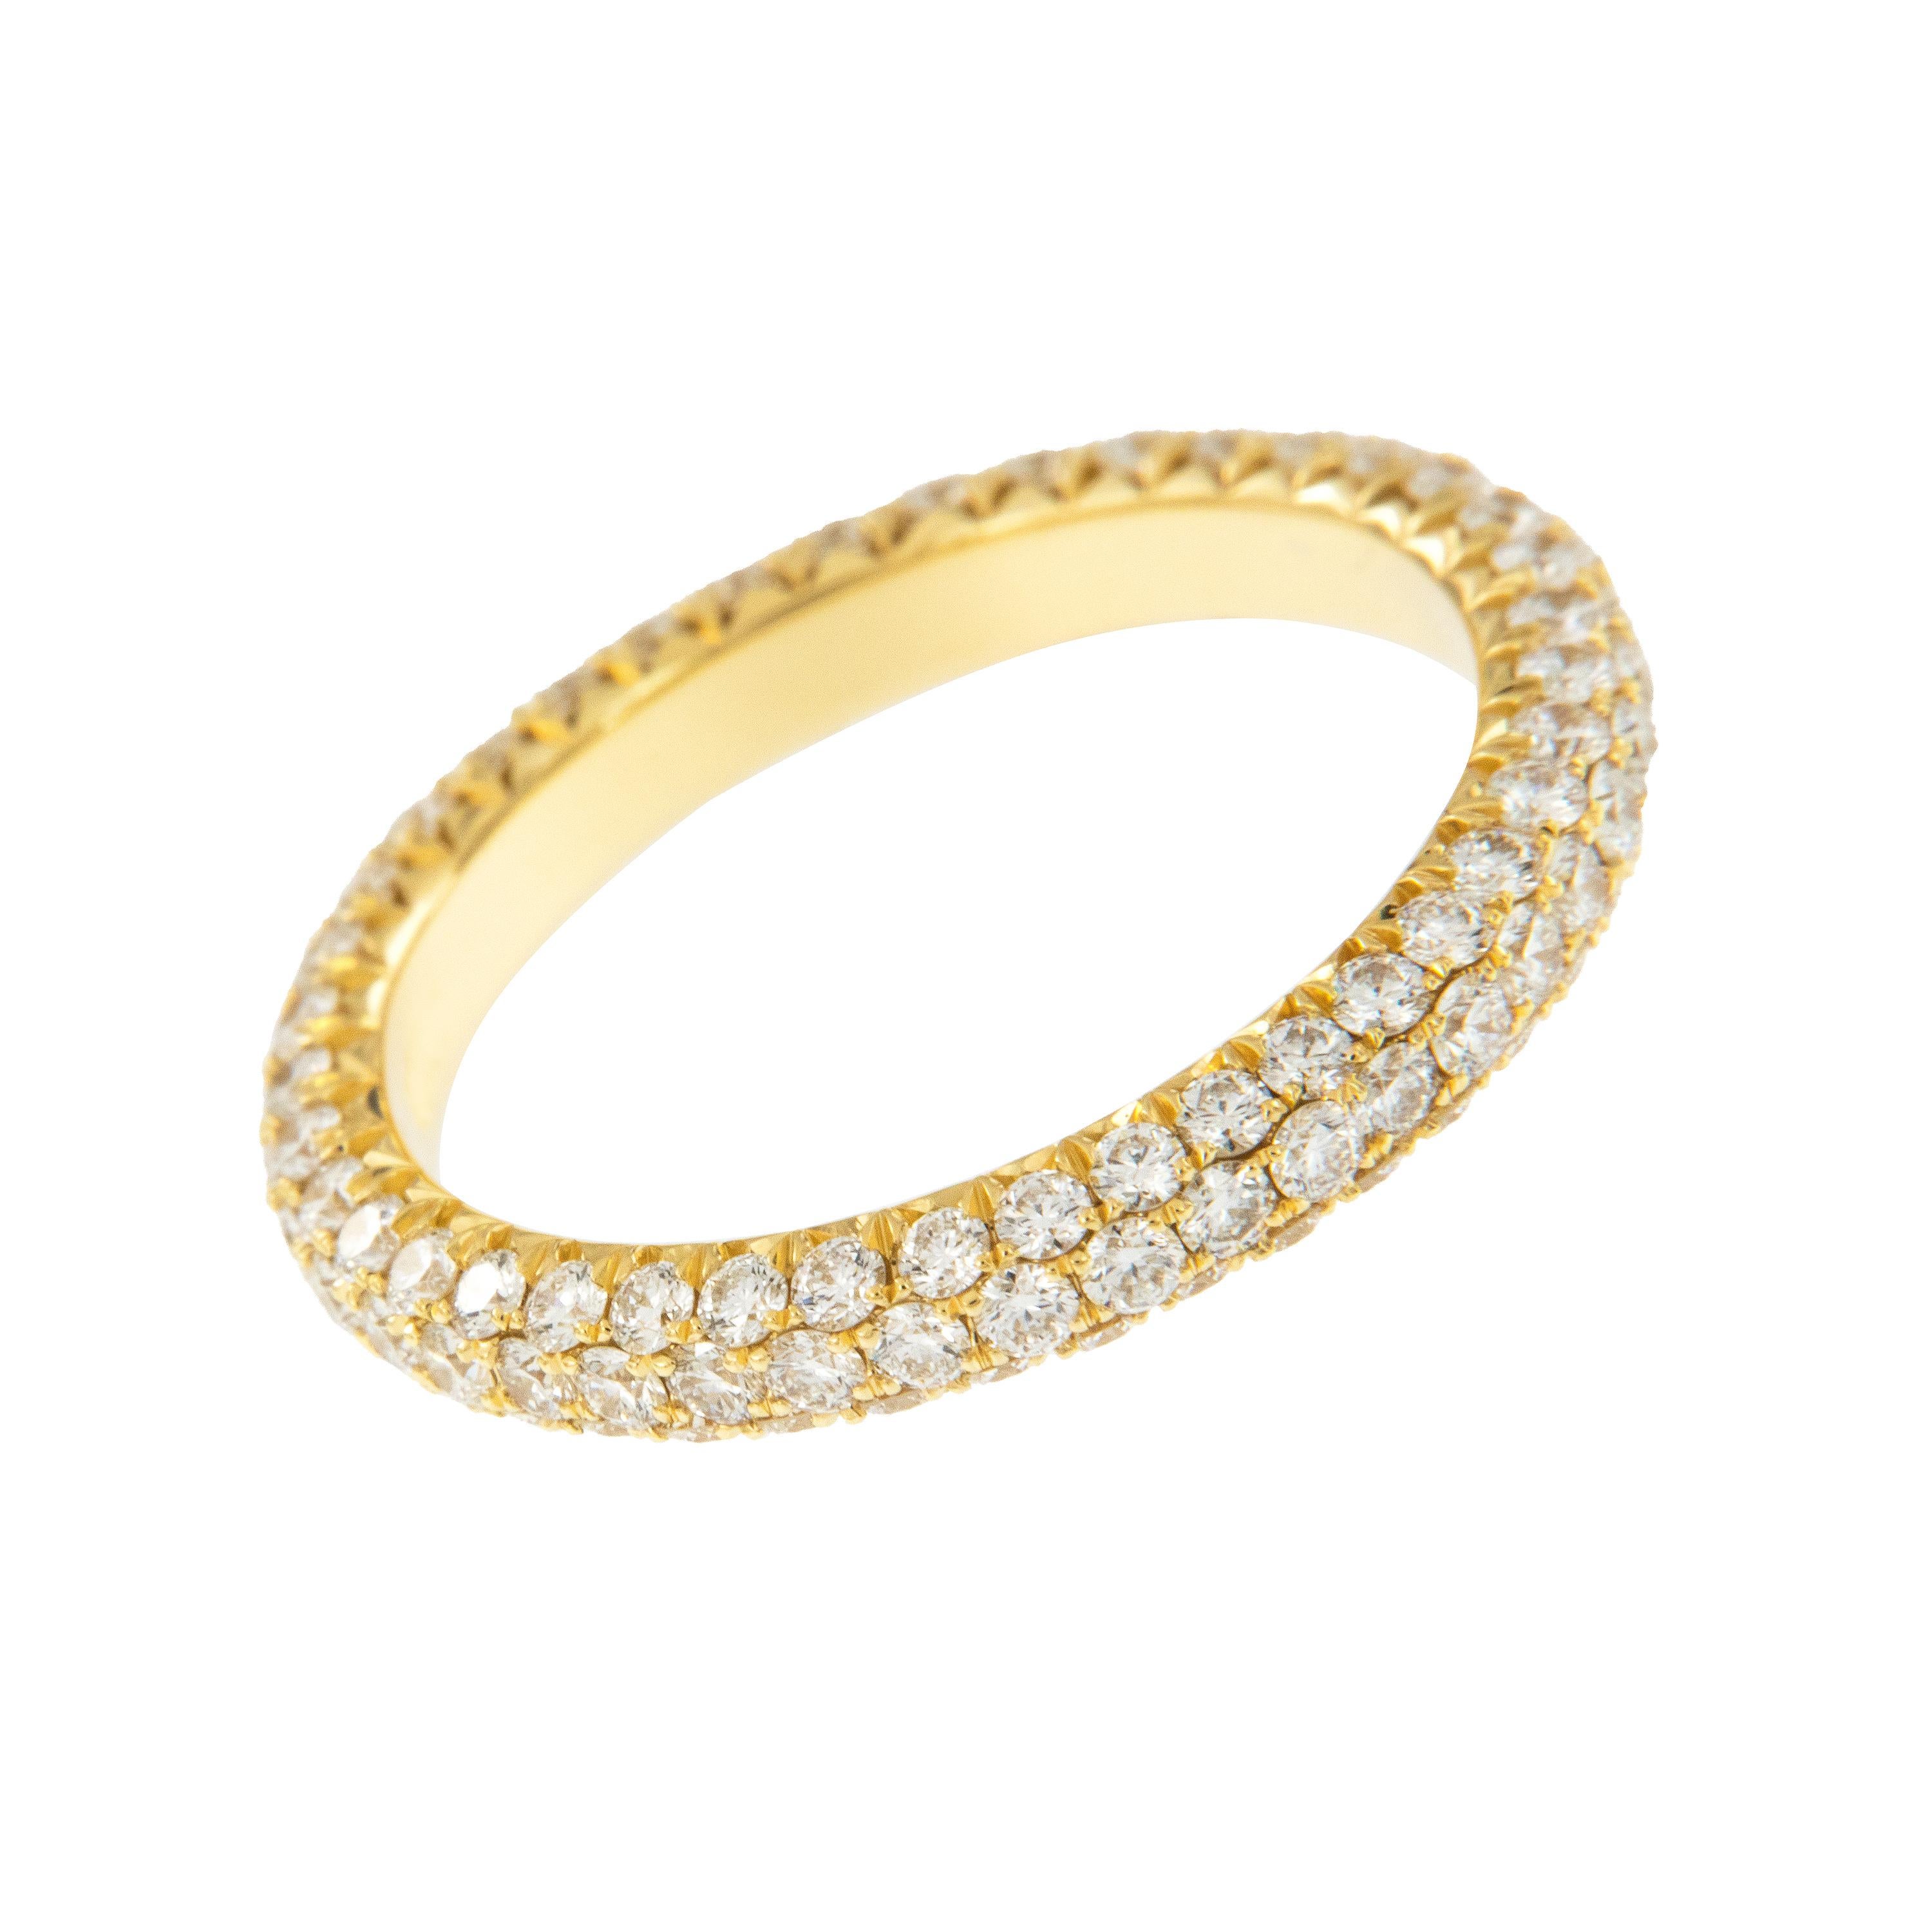 Expertly crafted eternity band by William Rosenberg made from 18 karat royal yellow gold with 3 row pave' set round brilliant diamonds = 1.49 Cttw. These exceptional diamonds are of VS clarity & D-F color. This ring was made in a size 6 but can be